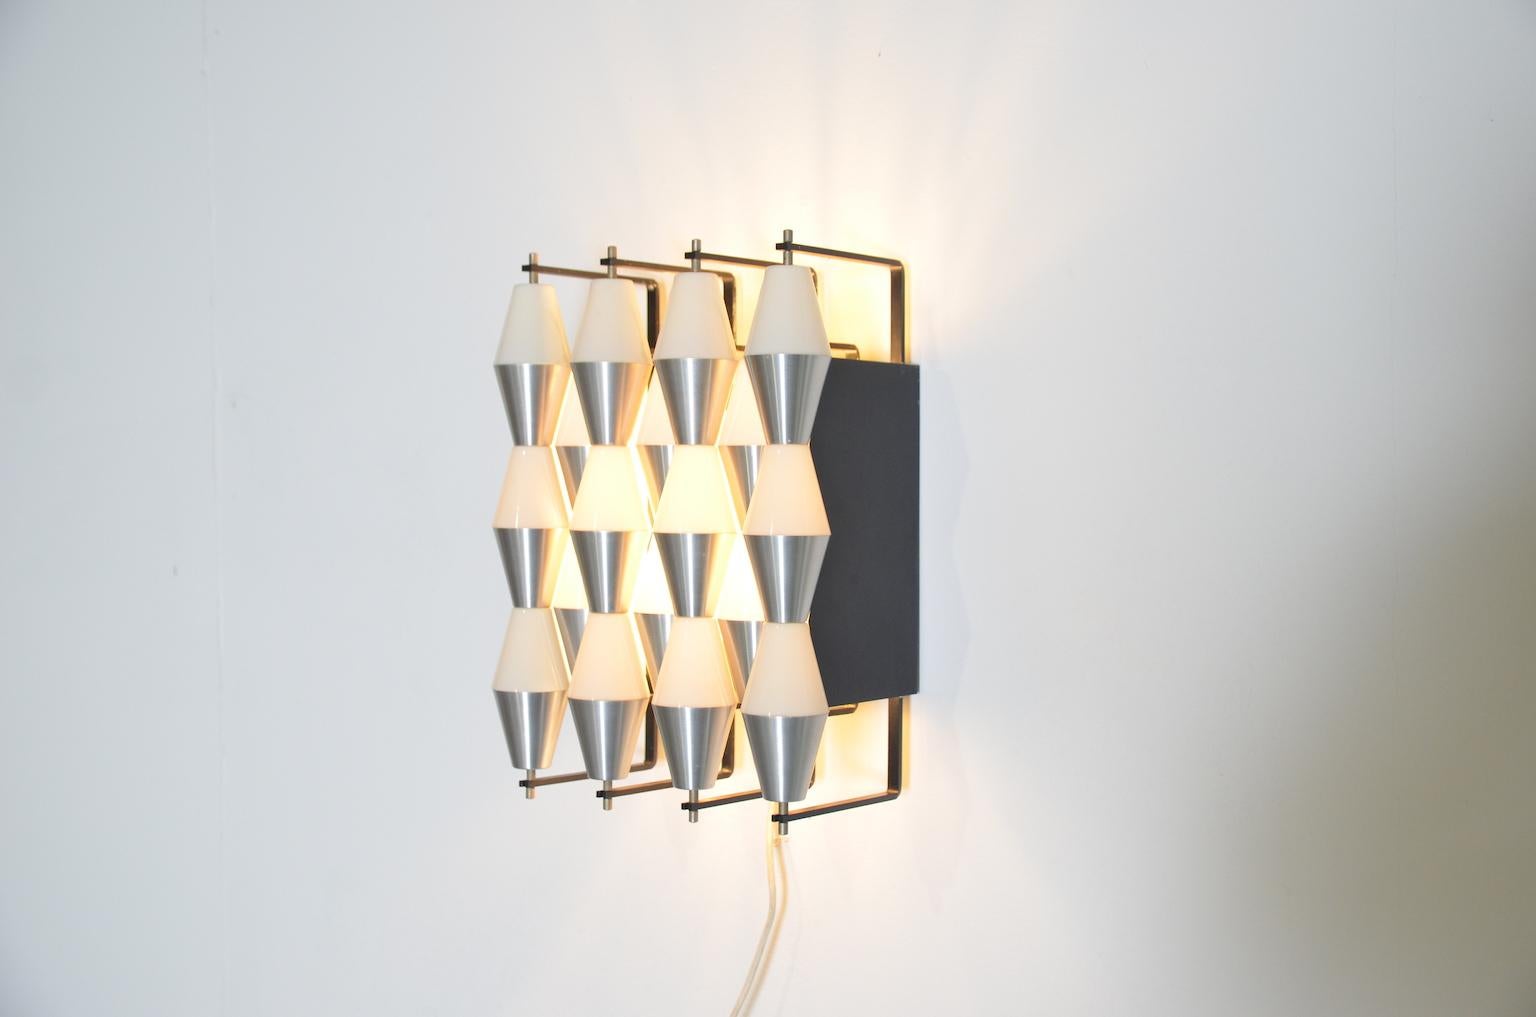 Model c-1656 by RAAK Amsterdam is symmetrically designed and consists of '18 little boxes, half opal and half matted silver lined up together to illuminated wall decorations' according to the original text in the RAAK catalogue. The lamp has two